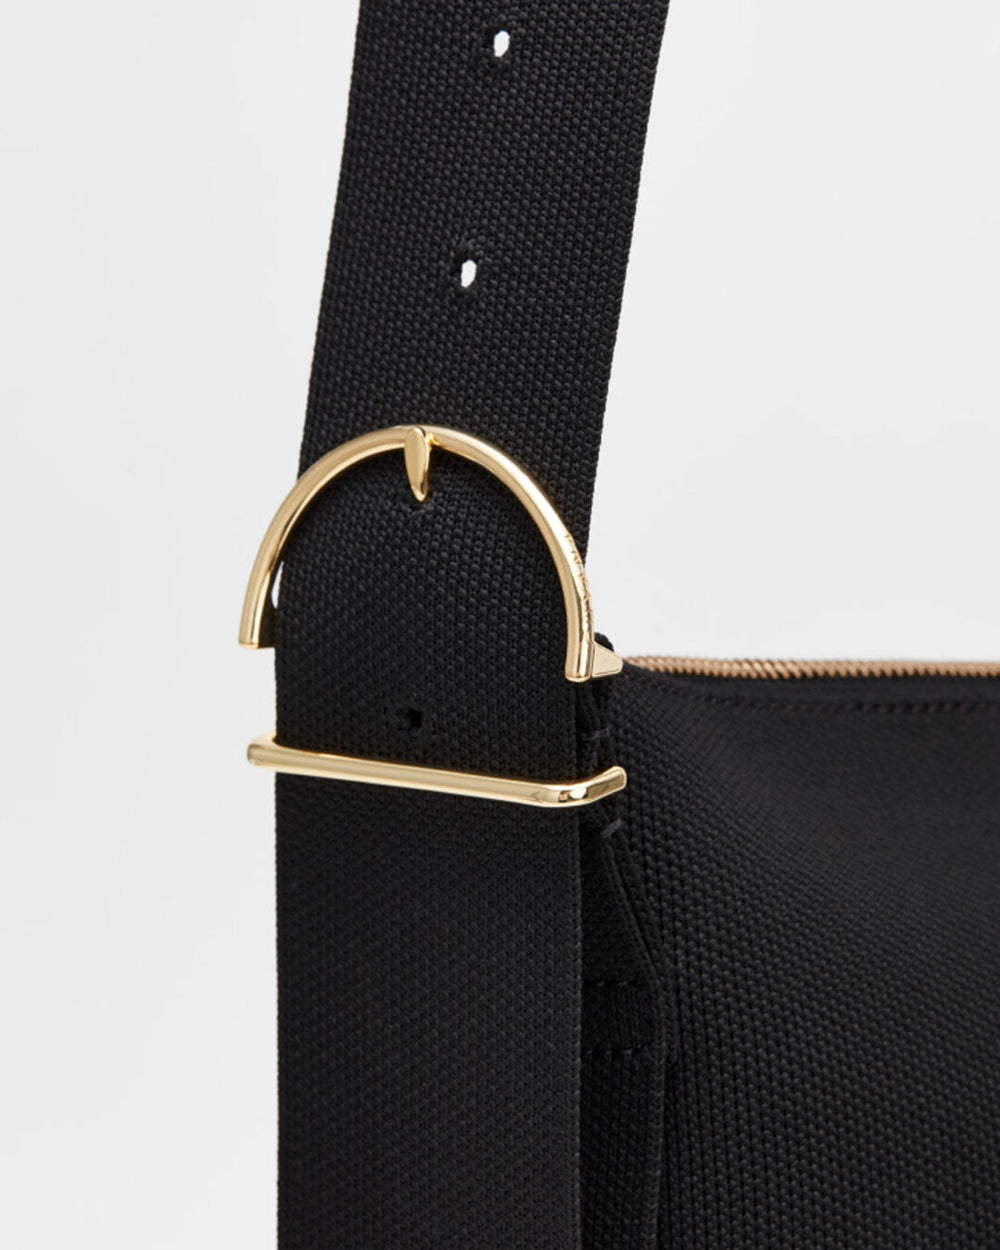 Close-up of a bag strap with metal buckle and adjustment holes.